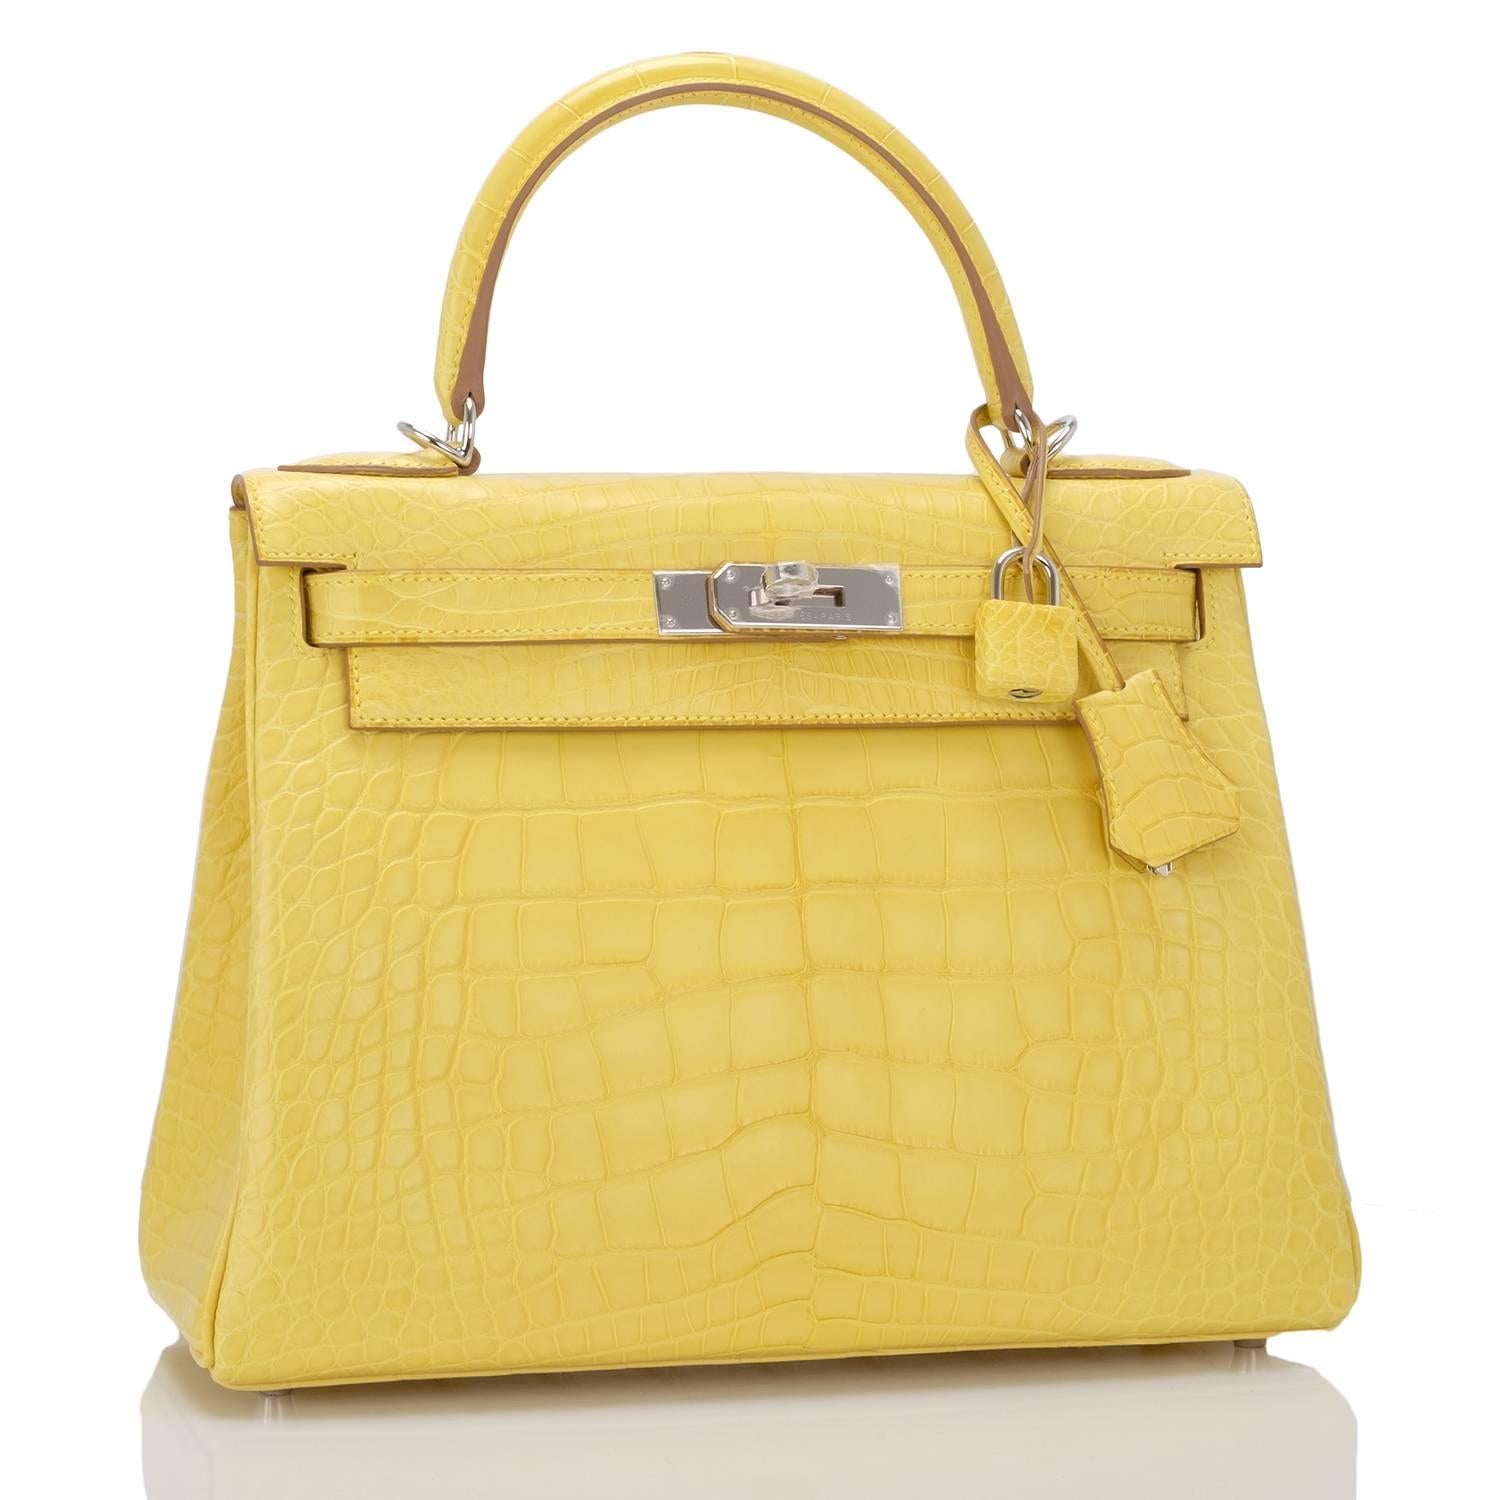 Hermes Mimosa Kelly 28cm of matte alligator with palladium hardware.

This Kelly has tonal stitching, a front toggle closure, a clochette with lock and two keys, single rolled handle and an optional shoulder strap.

The Interior is lined with